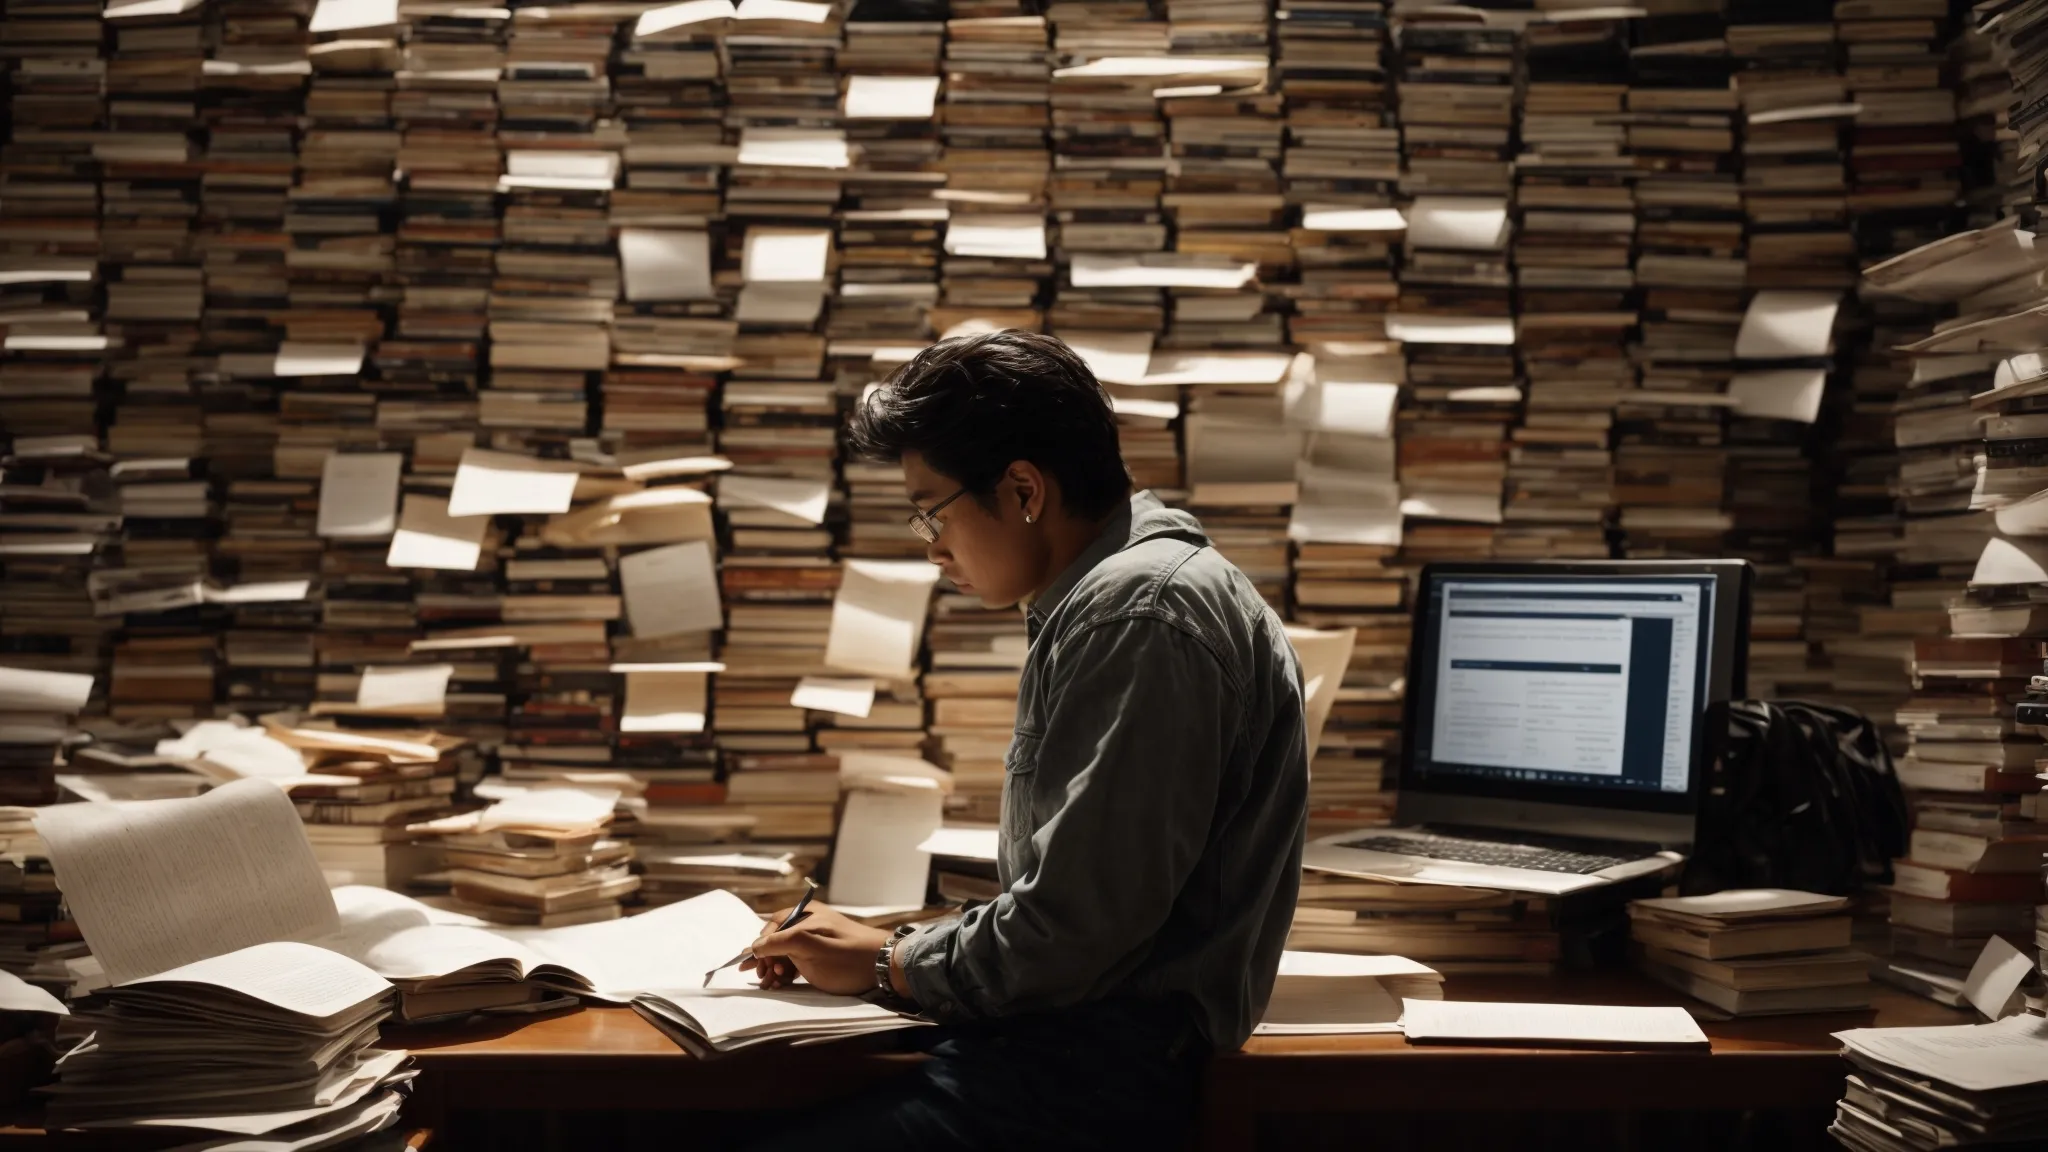 a person sitting at a computer, surrounded by books and notes, with a visible search engine on the screen.